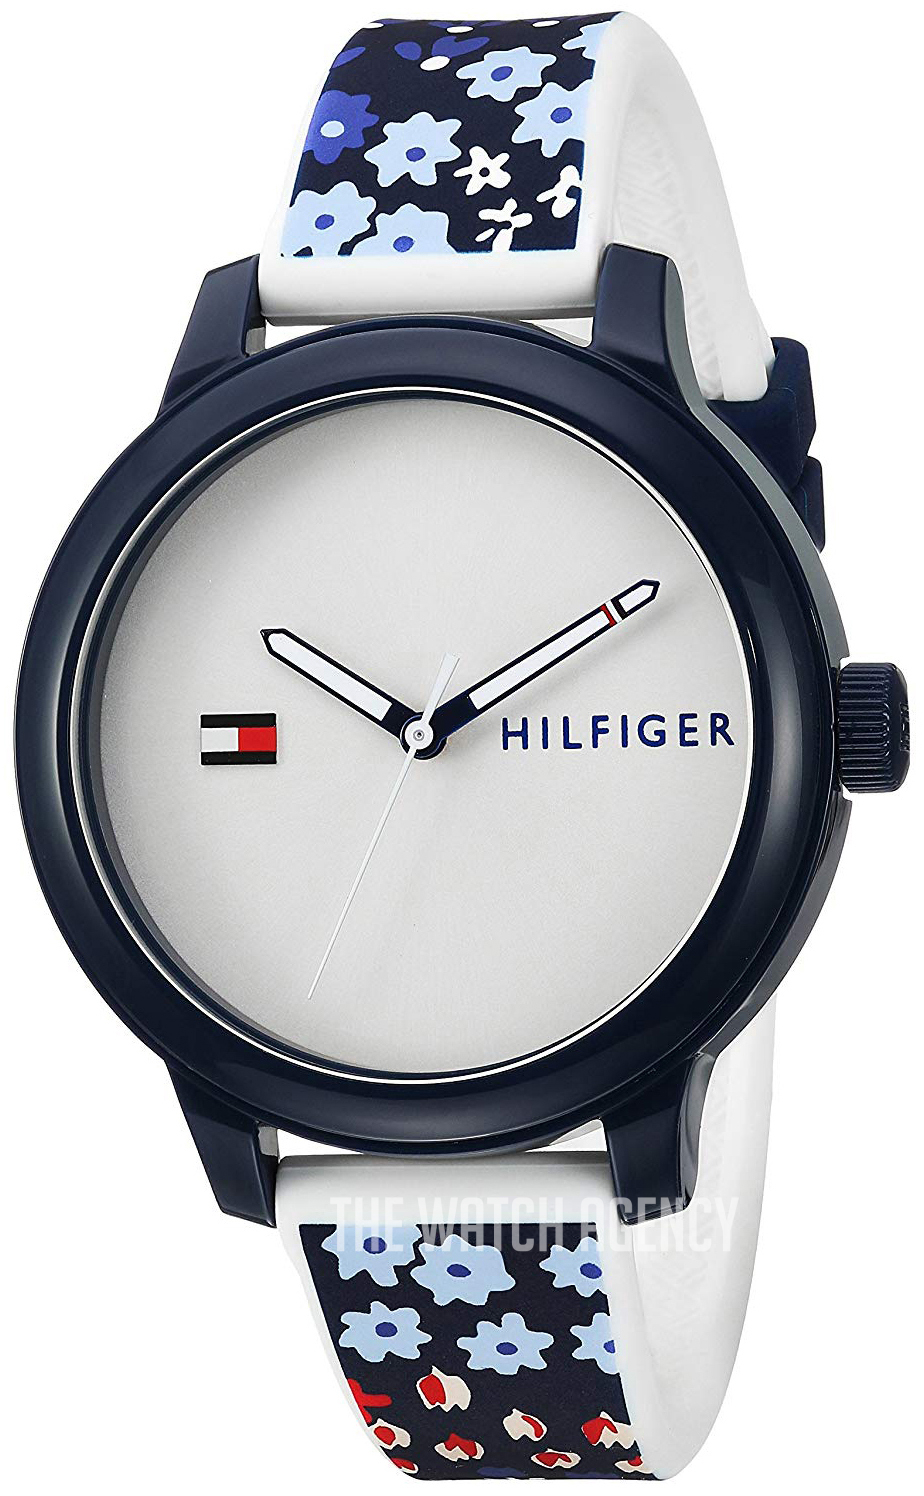 Certificate inflation tobacco 1781778 Tommy Hilfiger | TheWatchAgency™